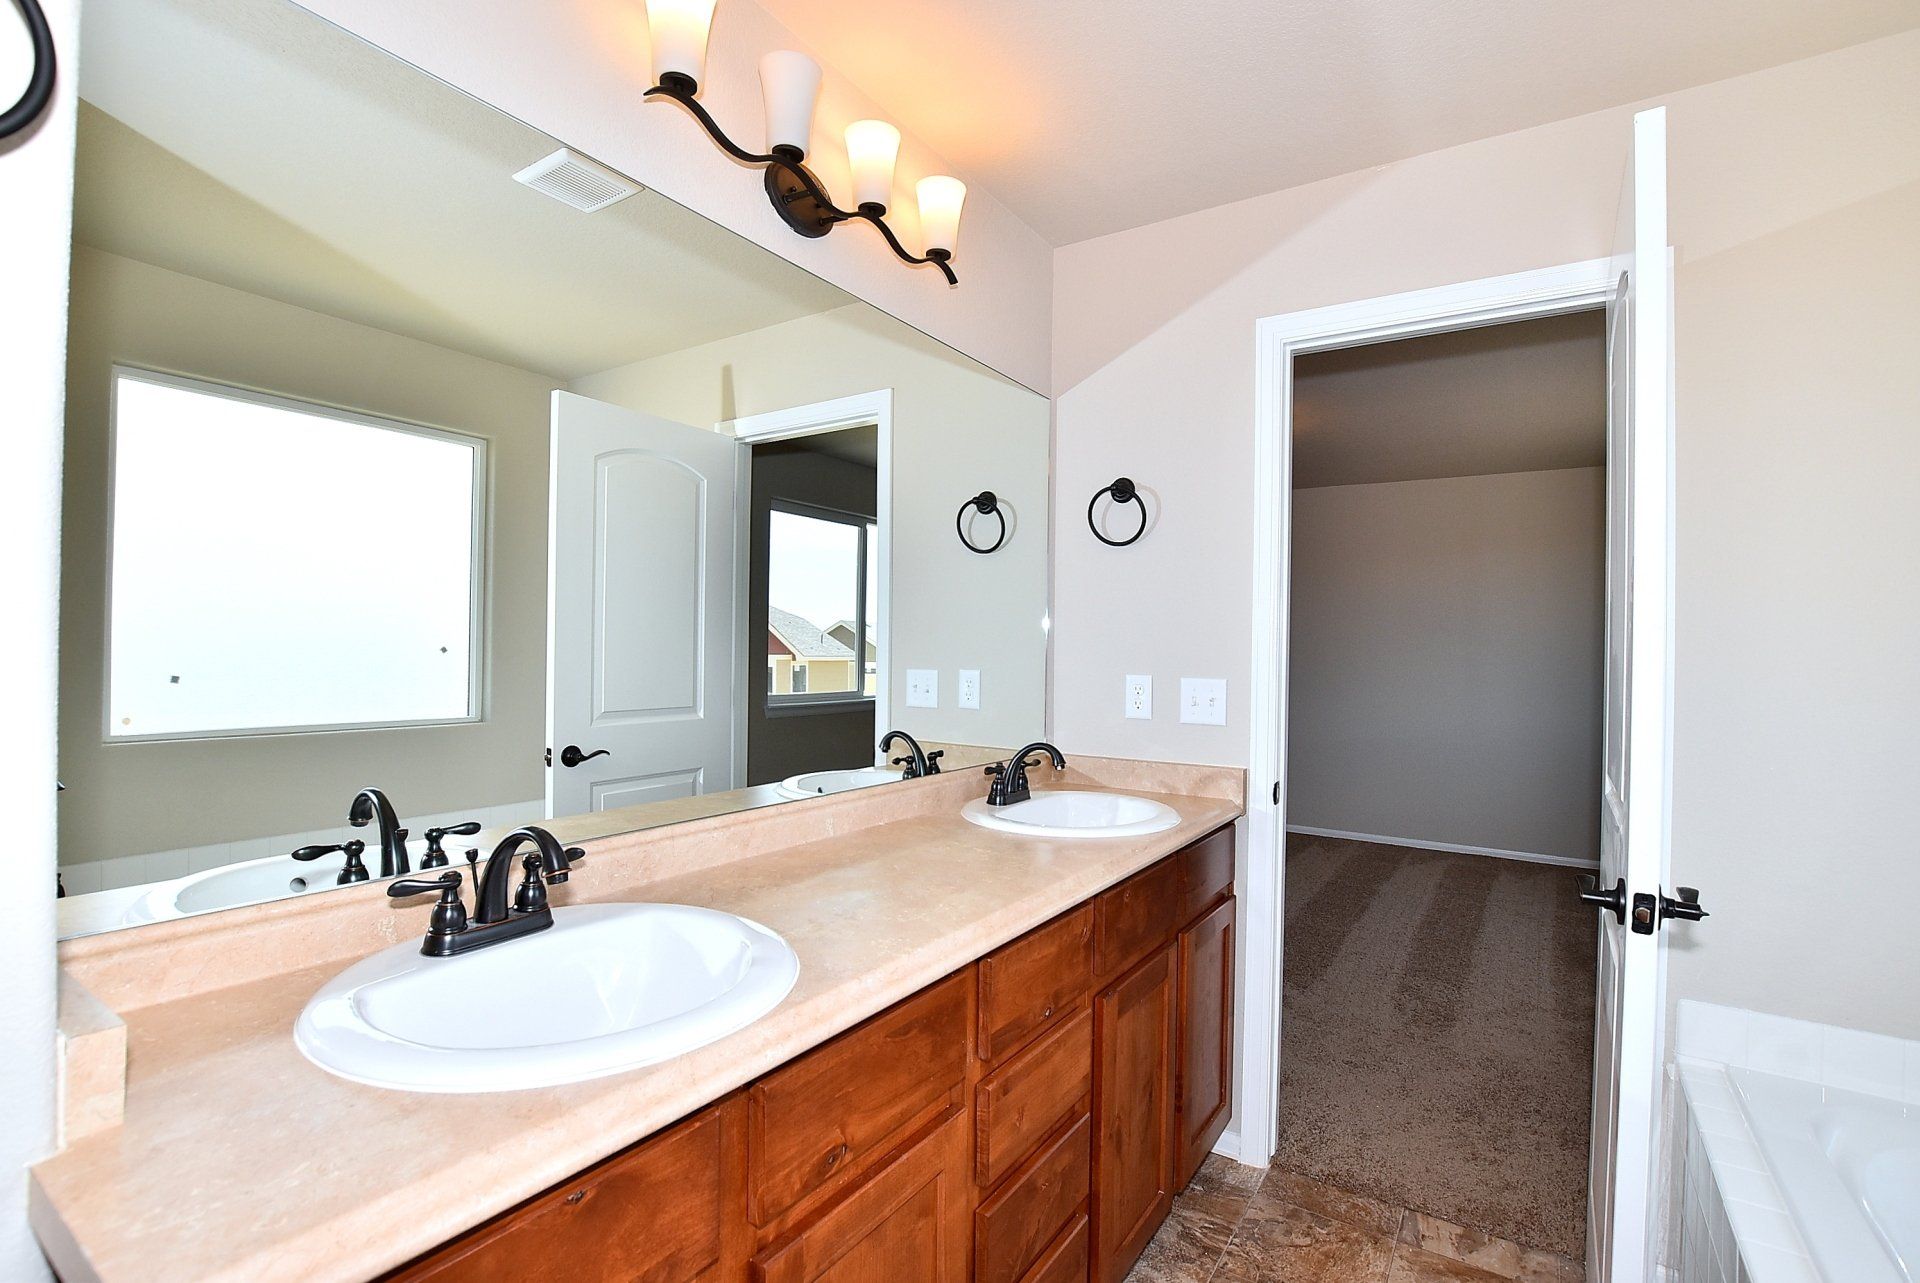 Large bathroom with bathtub and two sinks